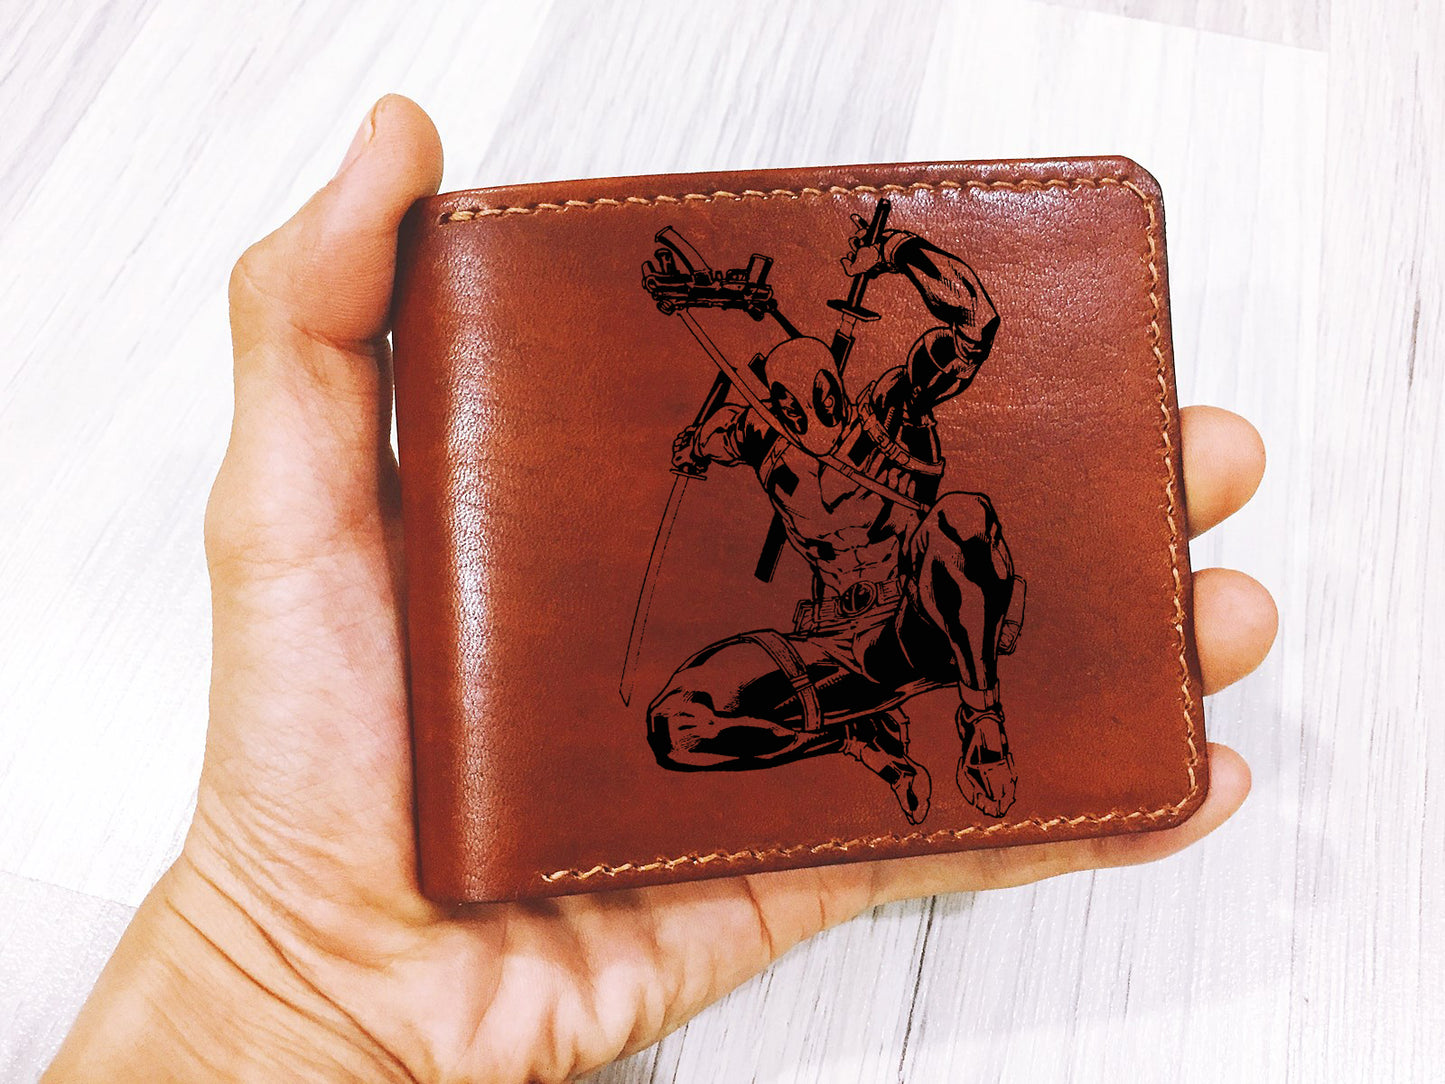 Mayan Corner - Deadpool superheroes leather handmade men's wallet, custom gifts for him, father's day gifts